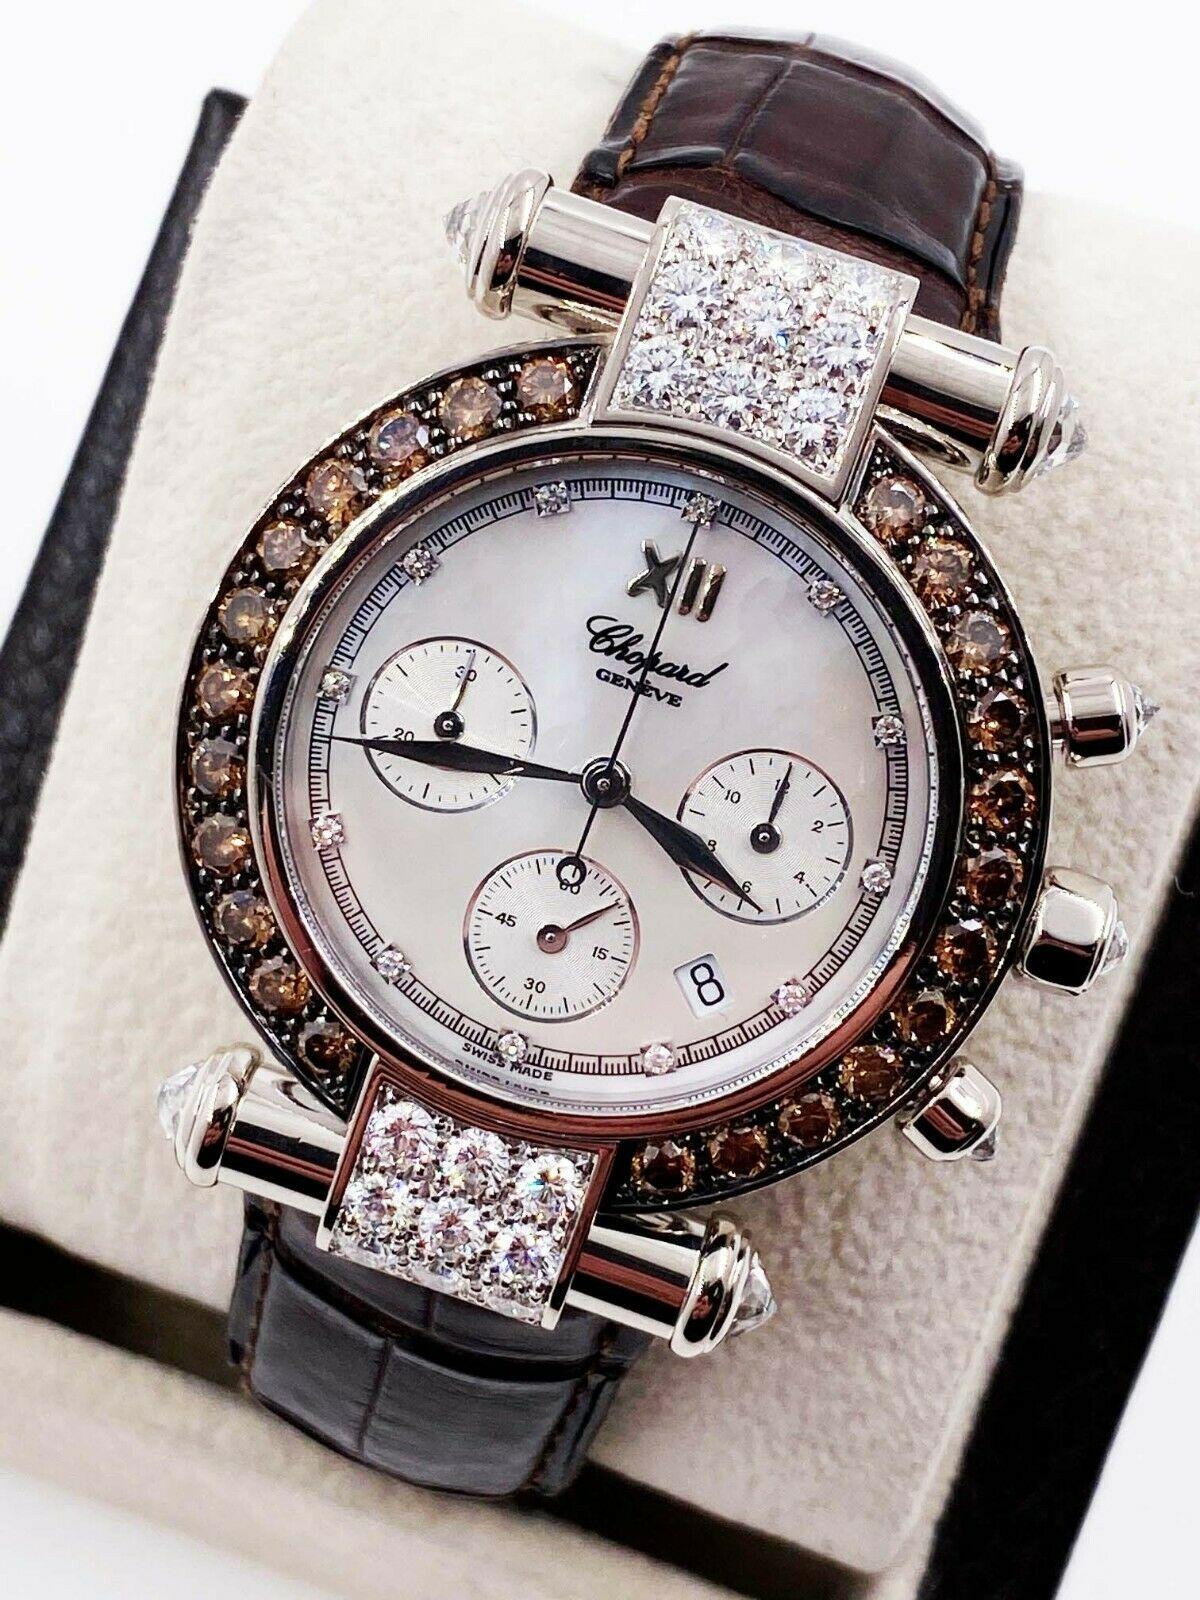 tyle Number:  1215 37 / 3168-52 

 

Model: Imperiale

 

Case Material: 18K White Gold

 

Band: Leather

 

Bezel: Chocolate Diamond Bezel

 

Dial: Original Blue Mother of Pearl with Diamonds

 

Face: Sapphire Crystal

 

Case Size: 36mm

